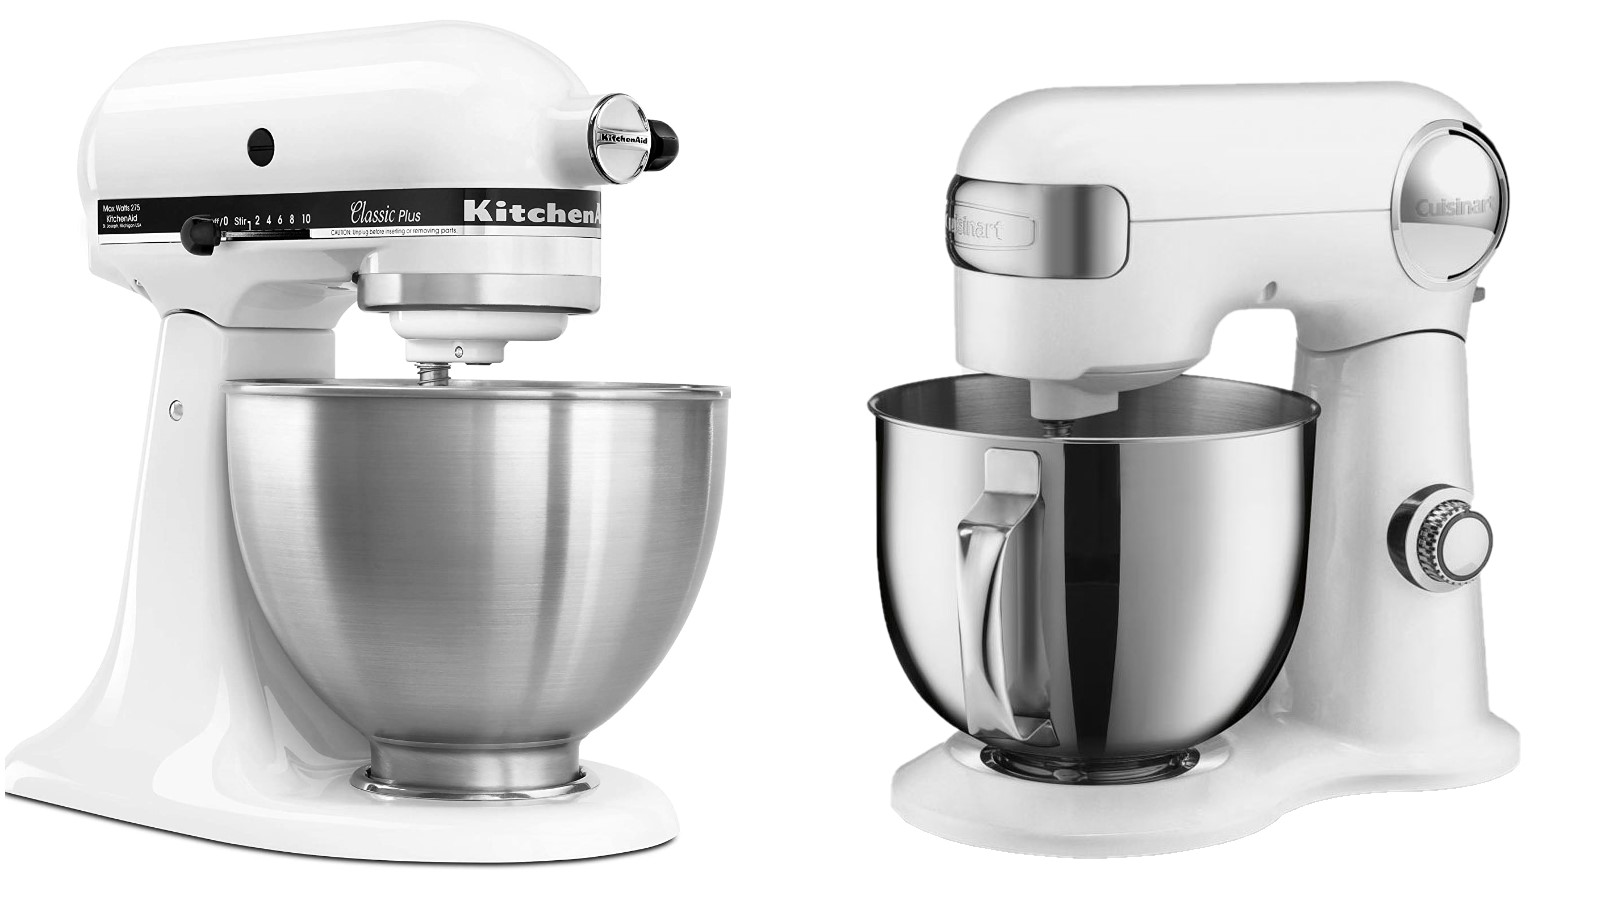 Cuisinart vs. KitchenAid Stand Mixers (12 Key Differences